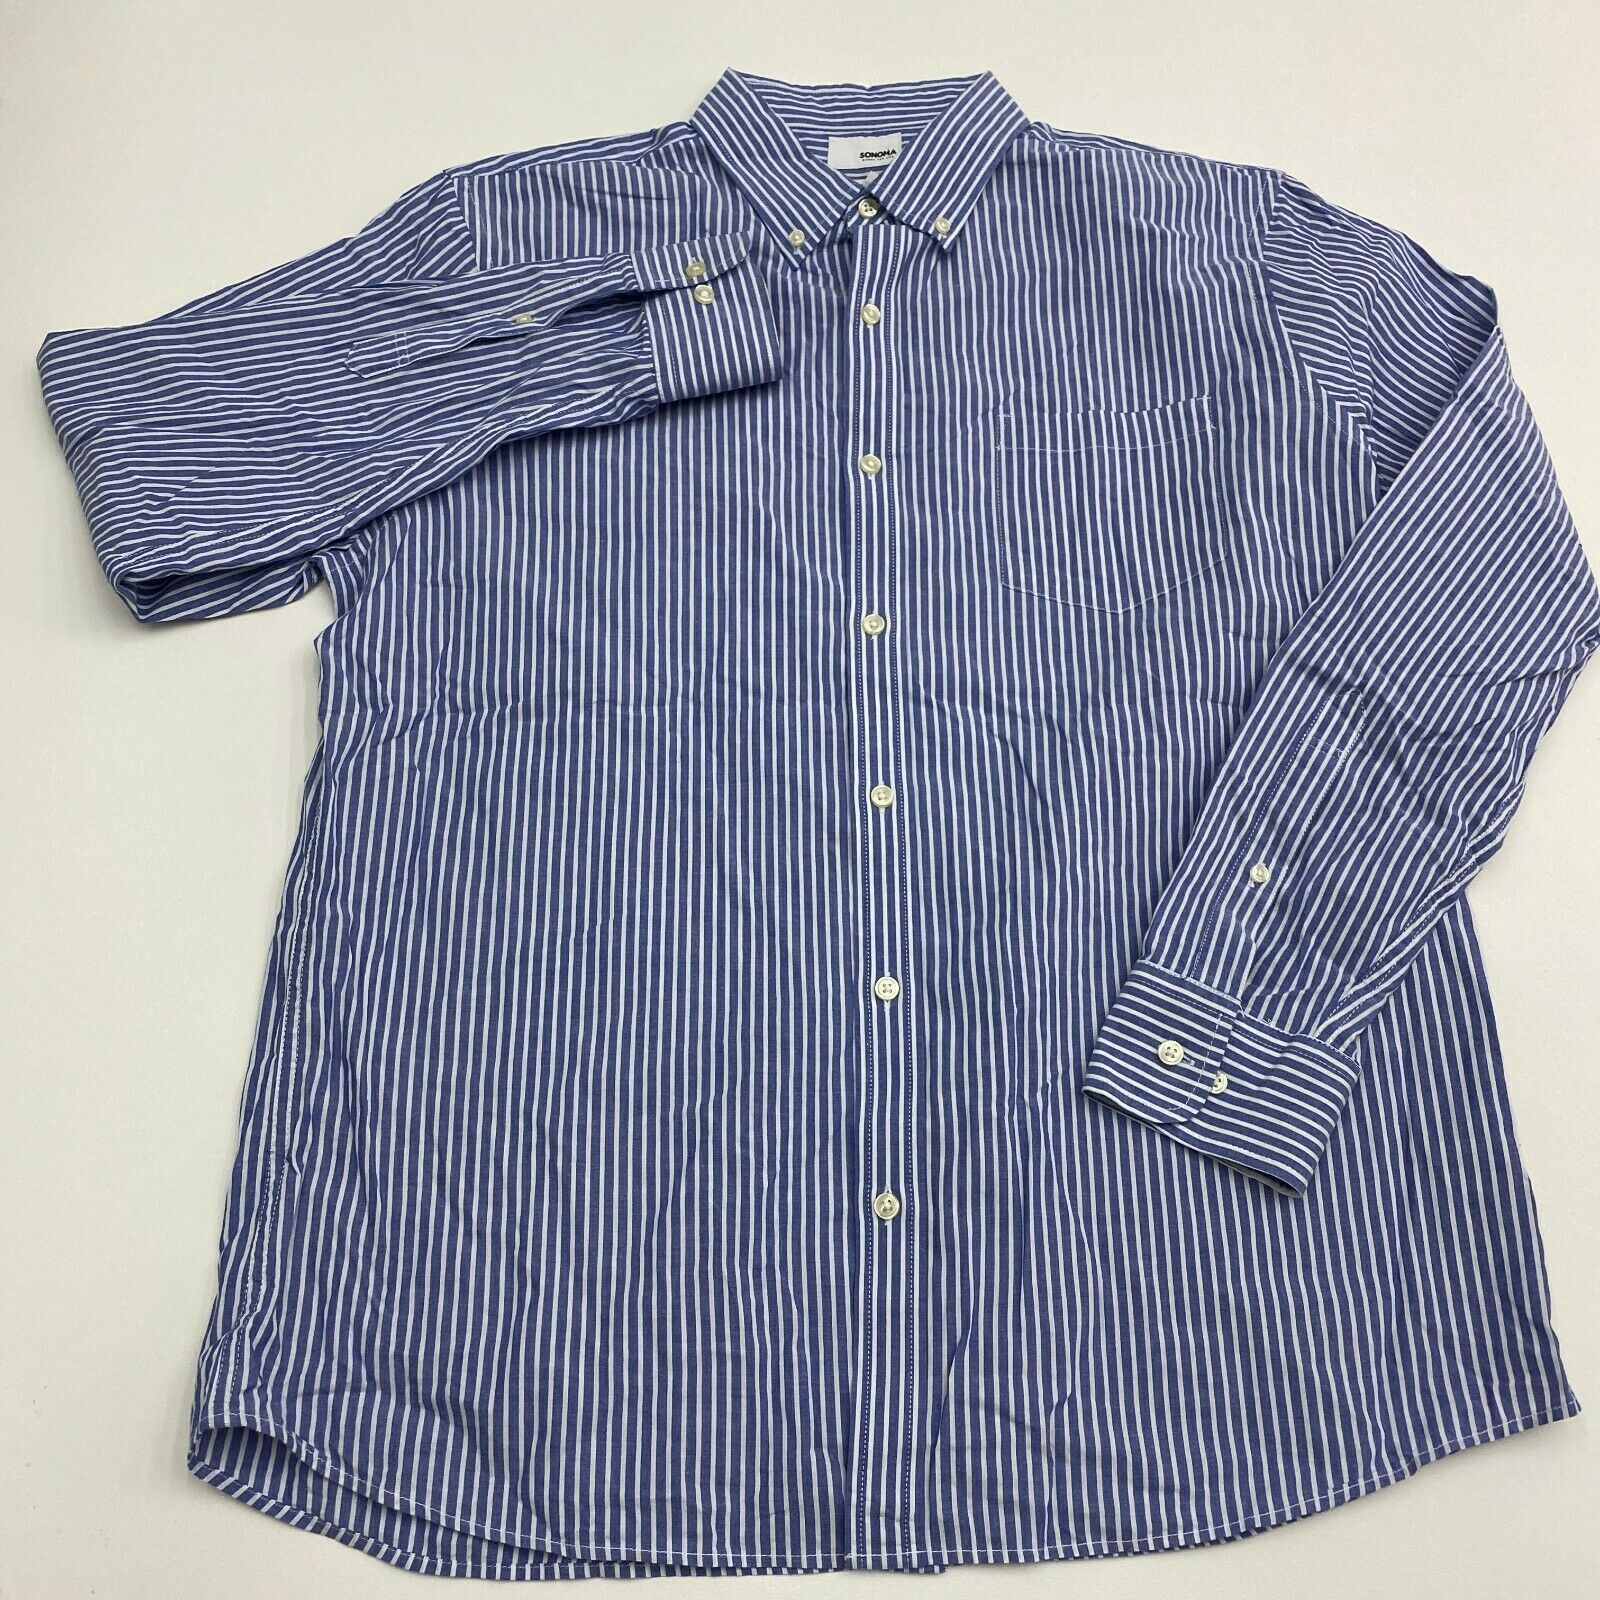 Sonoma Button Up Shirt Mens Large Blue White Stripe Long Sleeve Casual ...